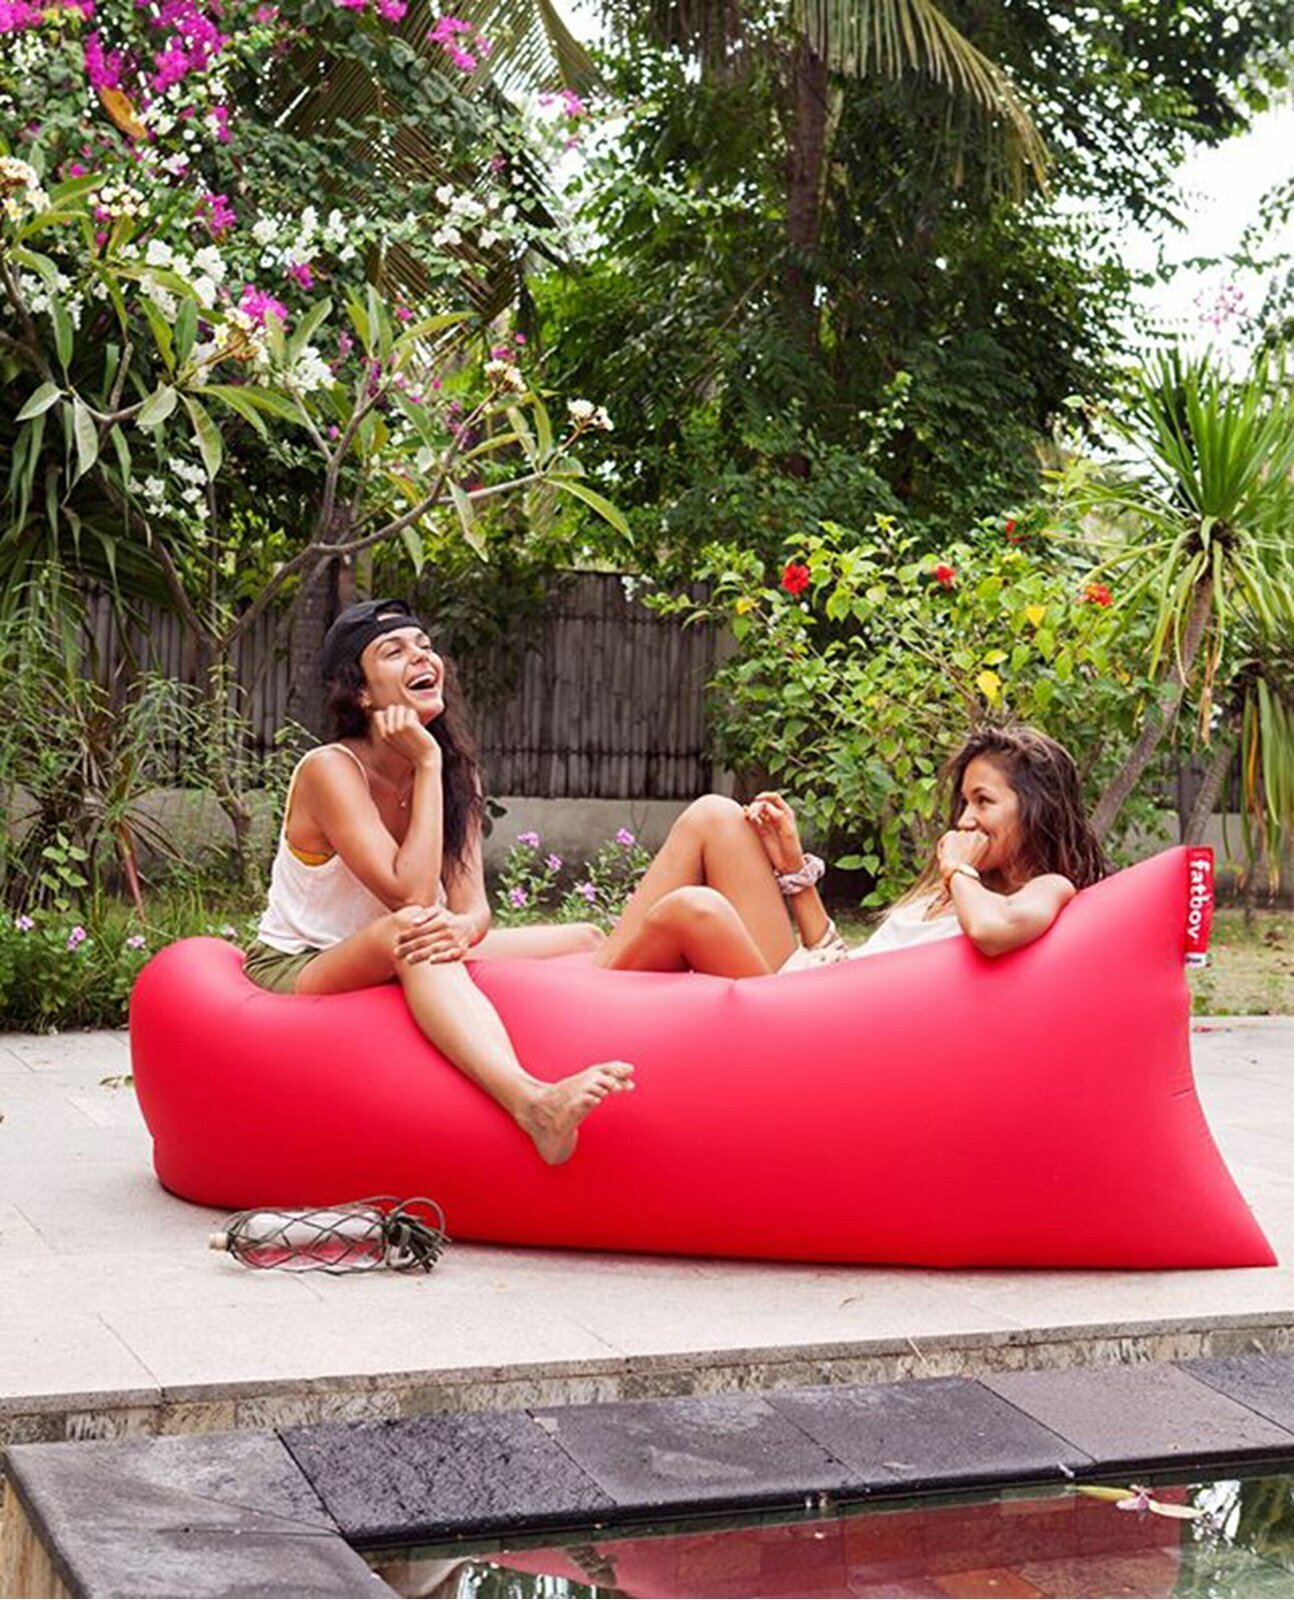 mysticall Inflatable Sofa Chiar Inflatable Bean Bag Chair Transparent Sequin Inflatable Sofa Chiar for Home Living Room Decoration 